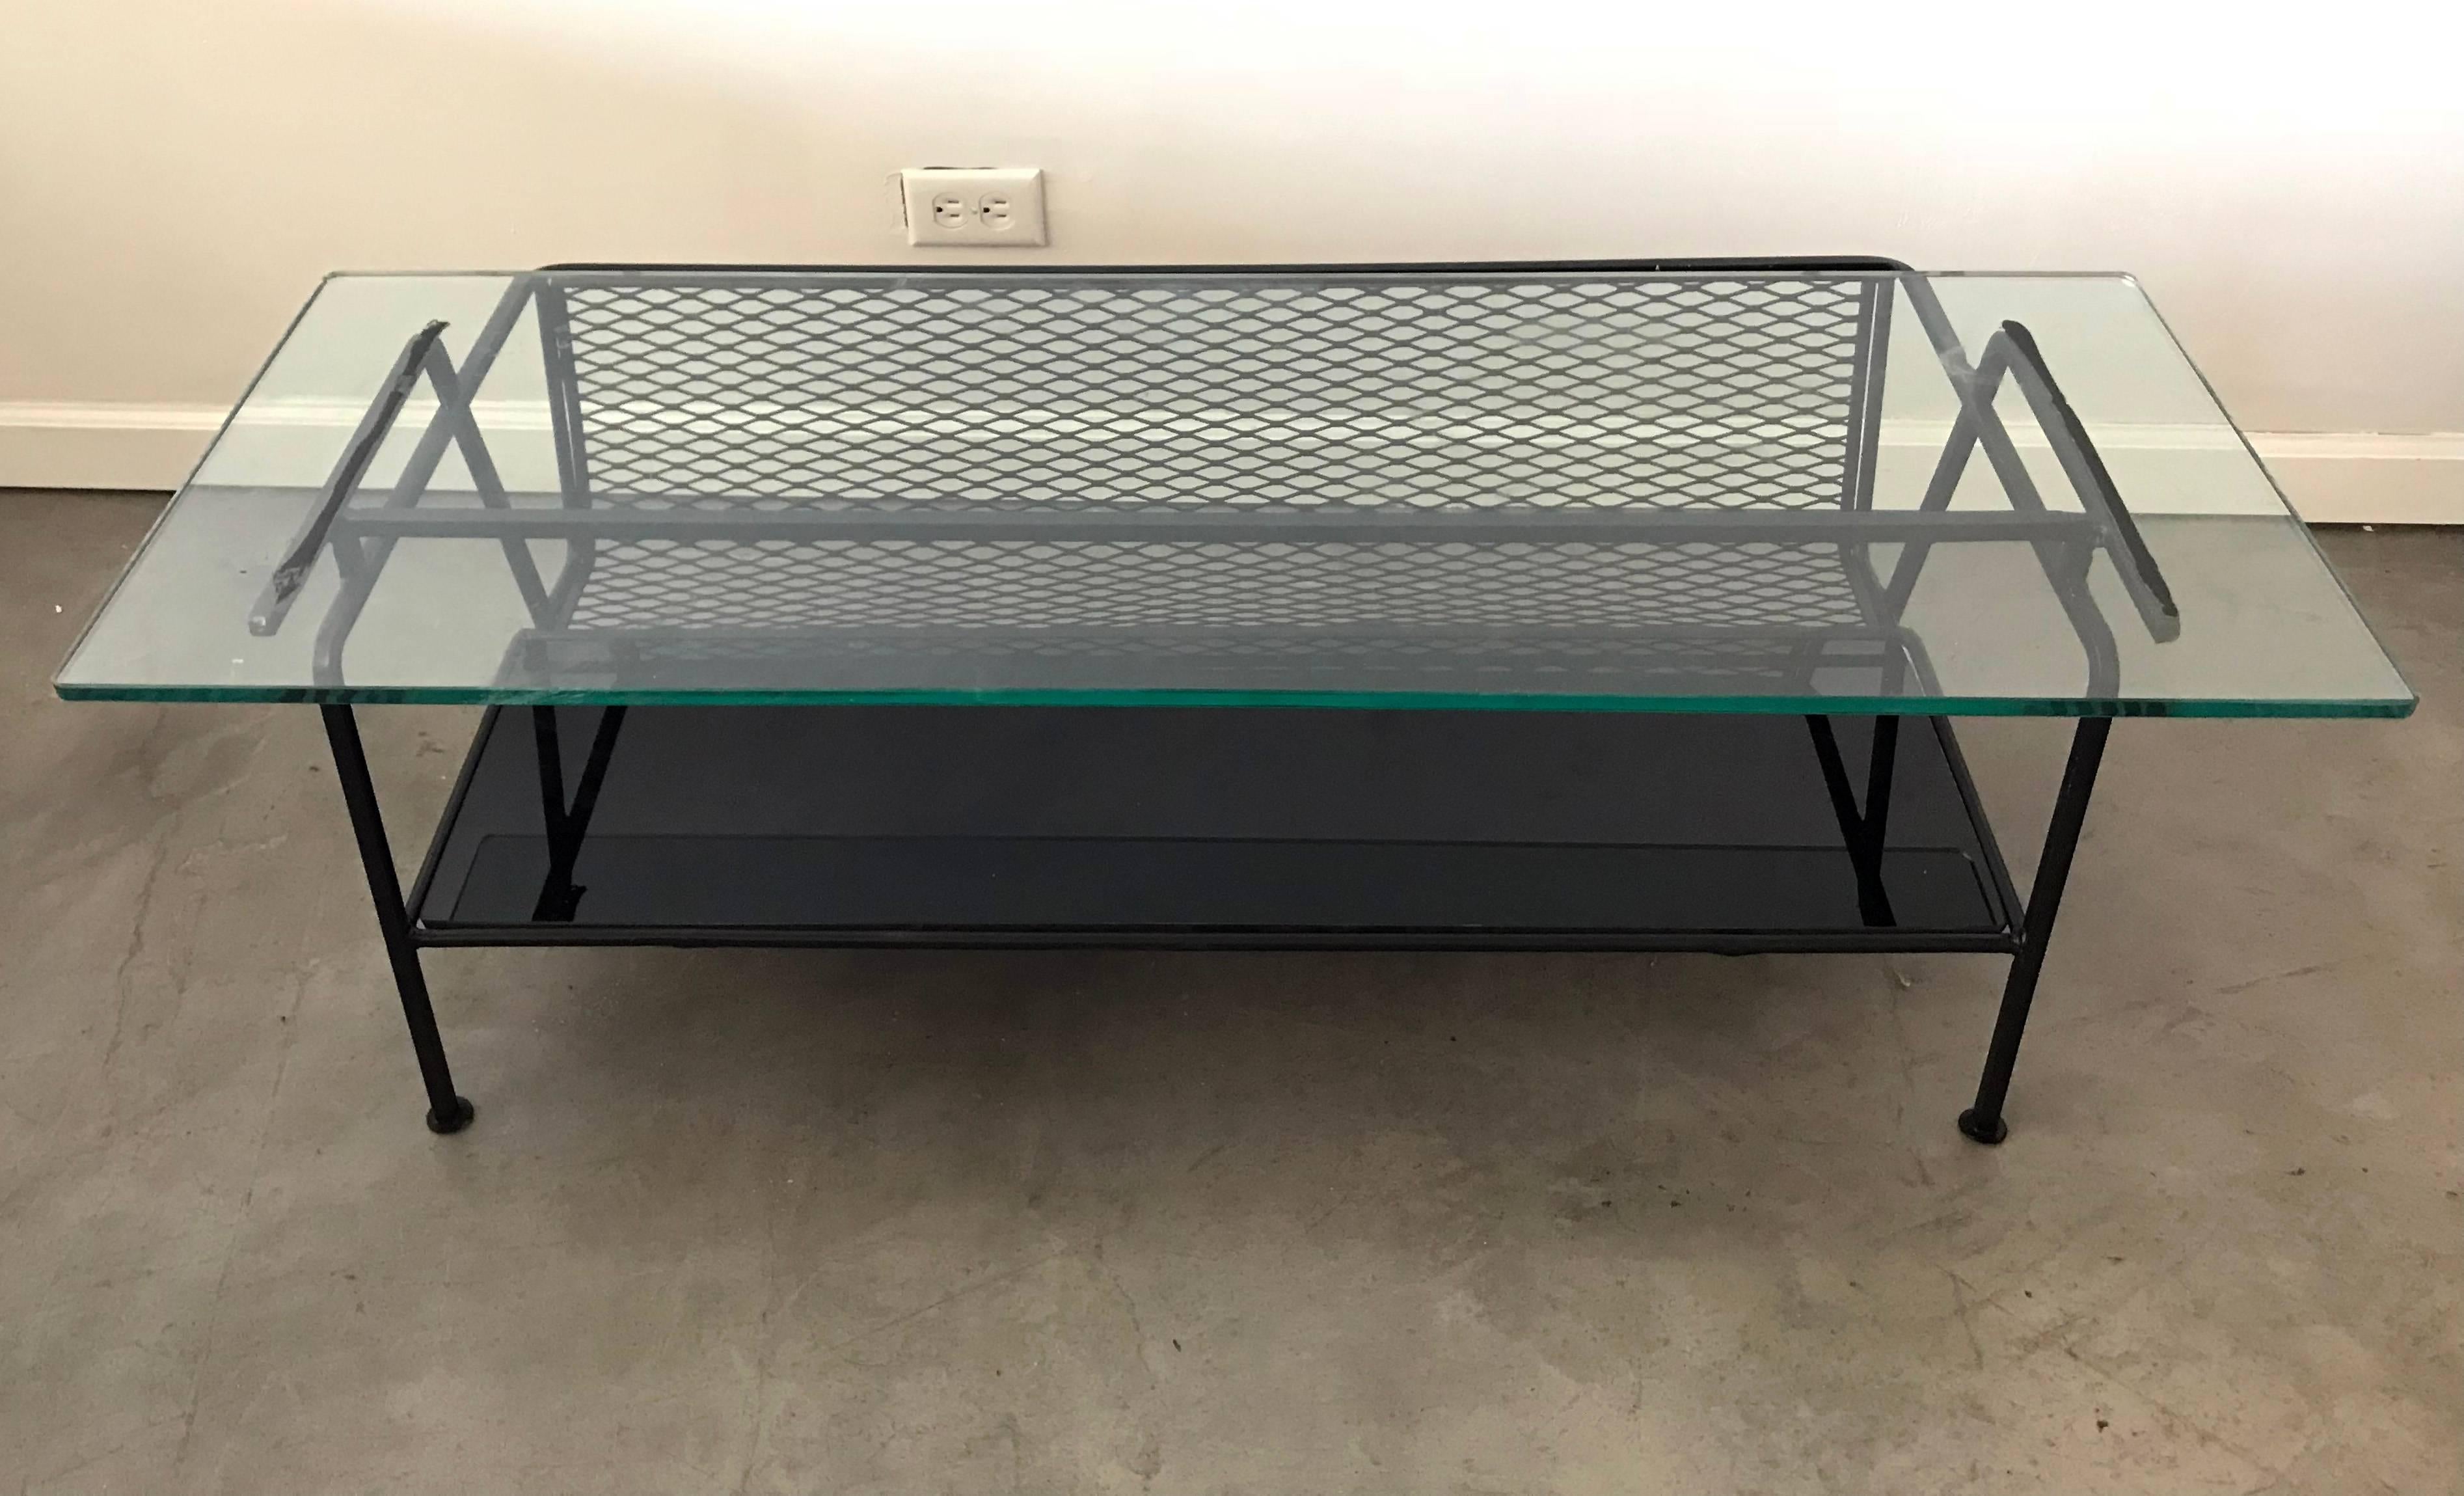 Such a simple clean design; this coffee table designed by Maurizio Tempestini for Salterini is the embodiment of Mid-Century Modernism. The table features a black glass bottom, with a clear glass top and mesh magazine rack. In excellent condition!